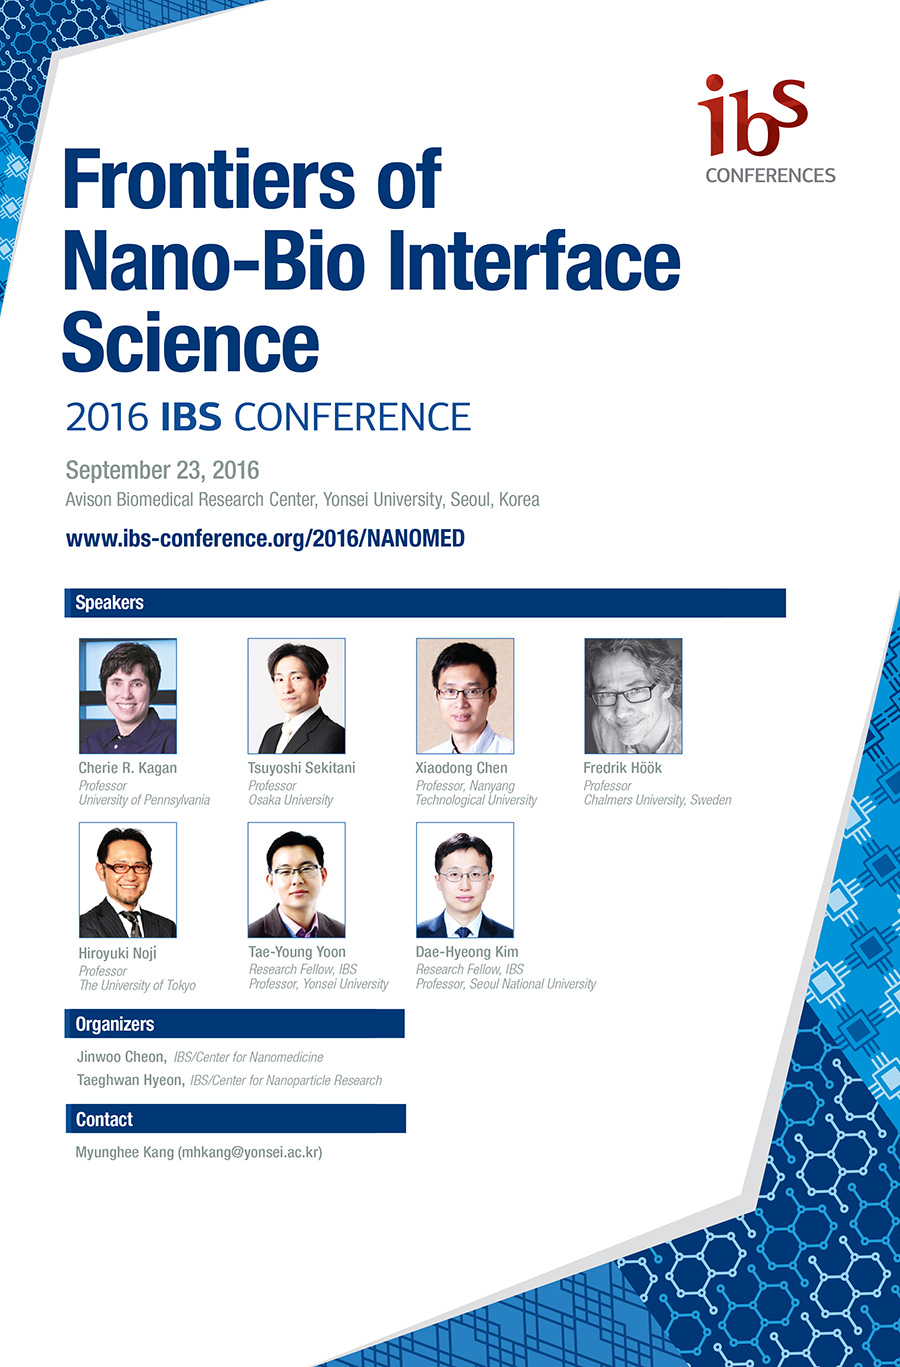 IBS Conference on Frontiers of Nano-Bio Science Poster